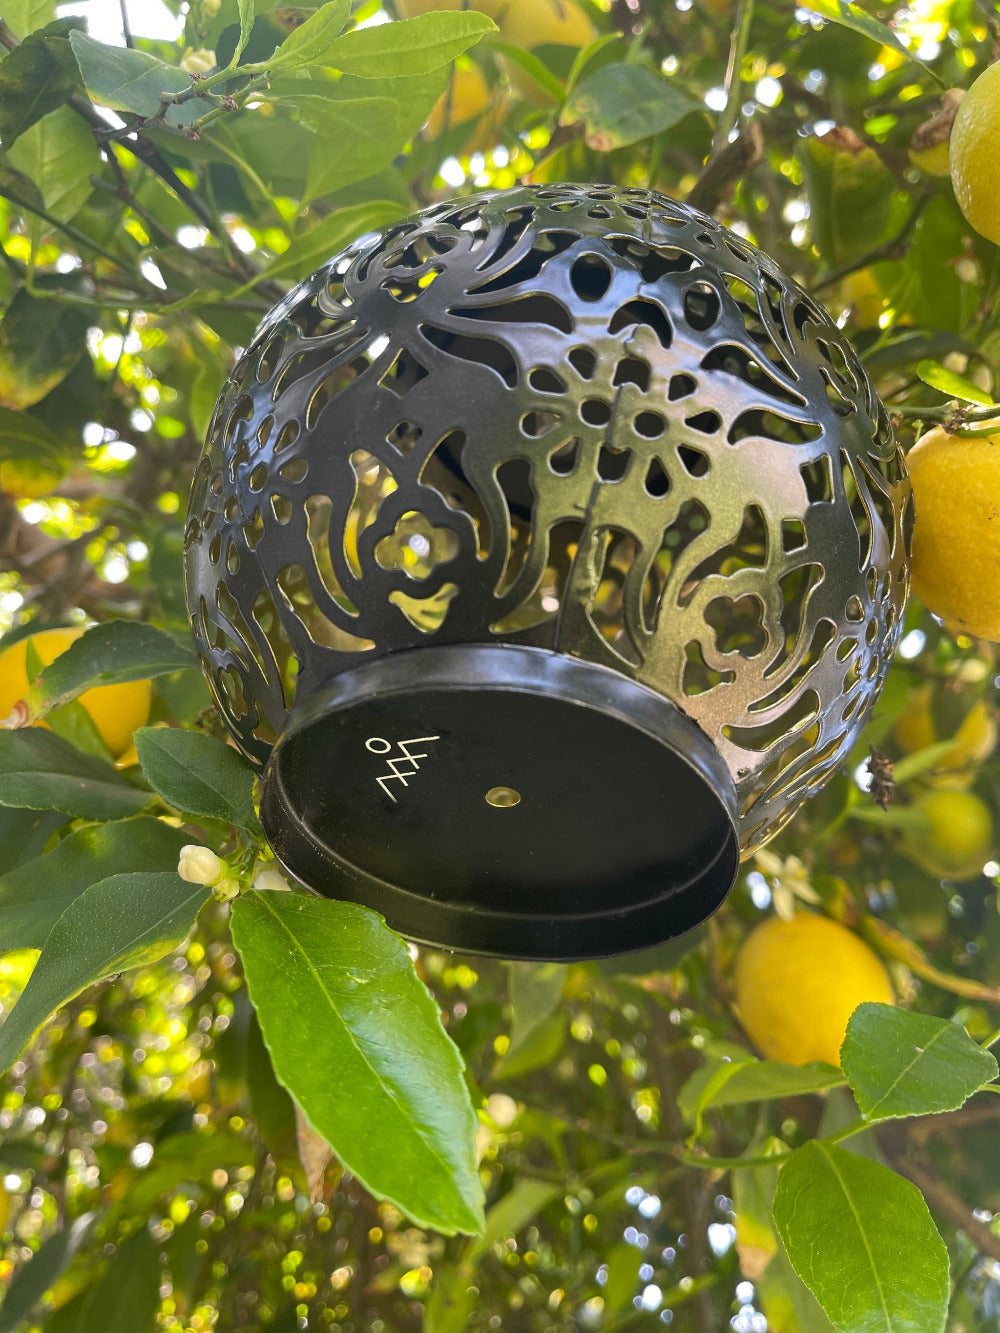 The bottom view of a hanging solar lantern hanging in a lemon tree in the daytime